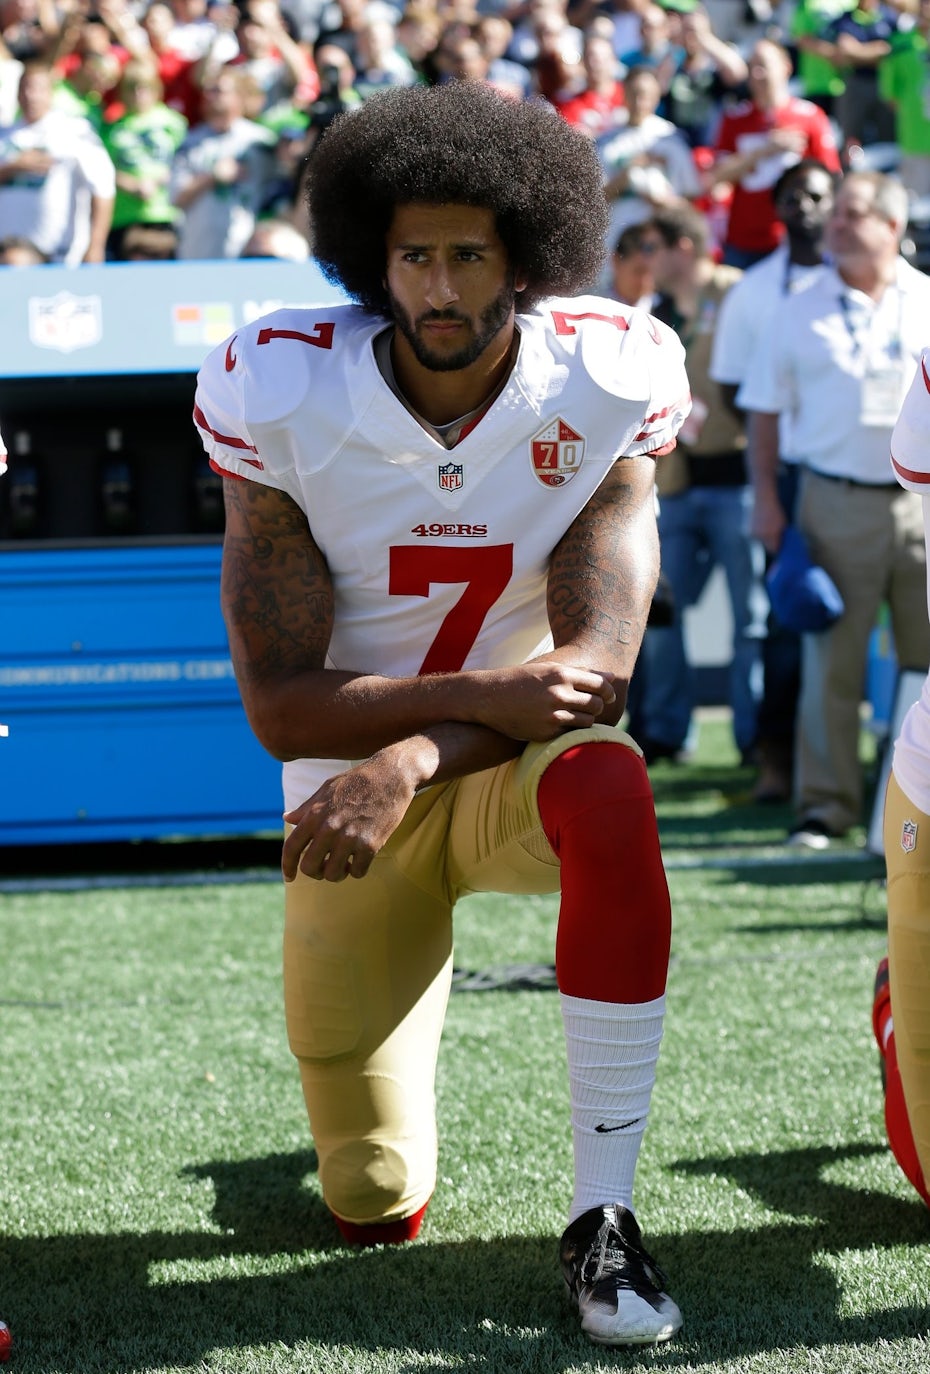 Colin Kaepernick kneels in protest during an NFL game